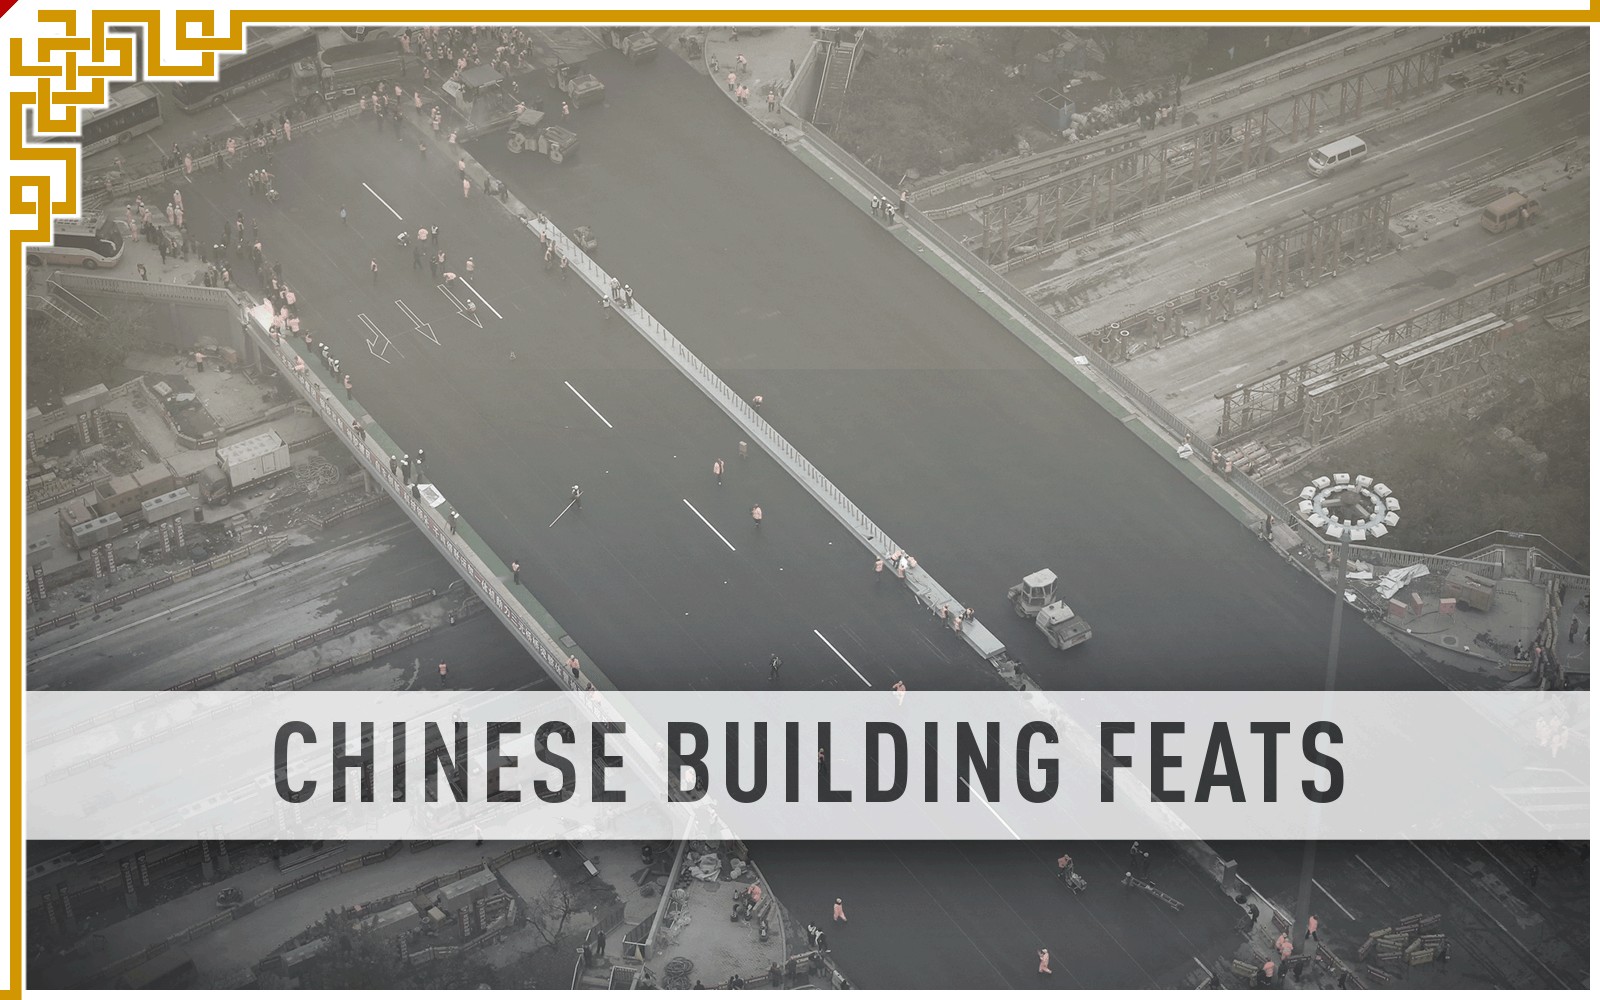 Chinese building feats